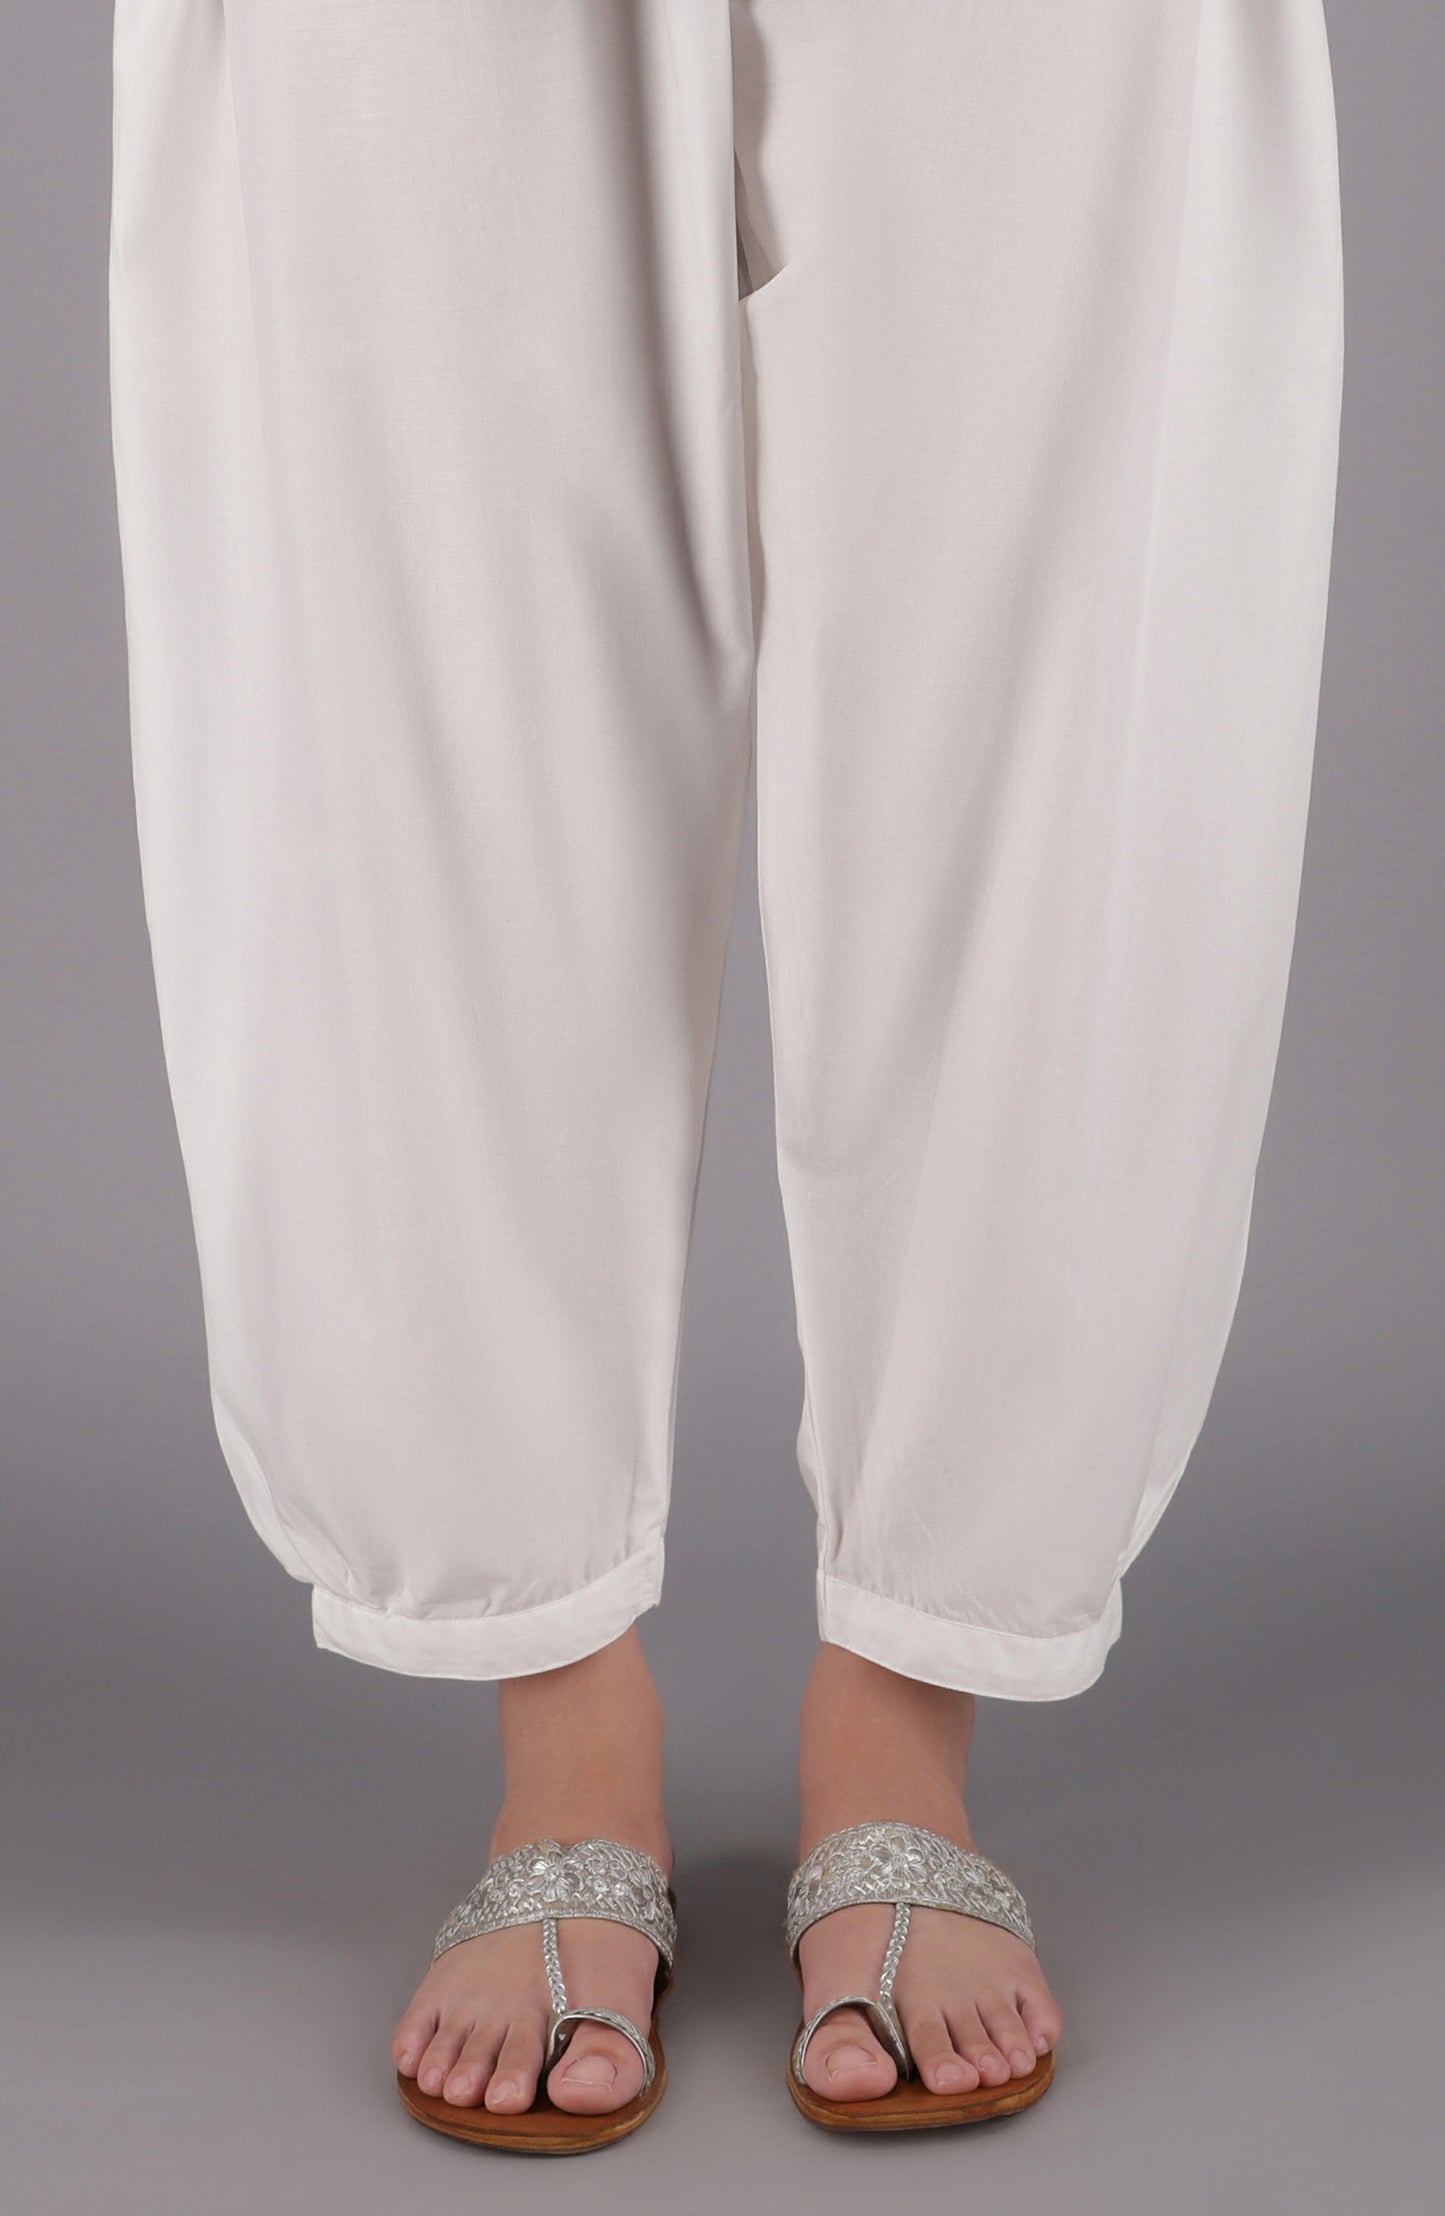 NRP-94/S WHITE CAMBRIC SCSHALWAR STITCHED BOTTOMS SHALWAR